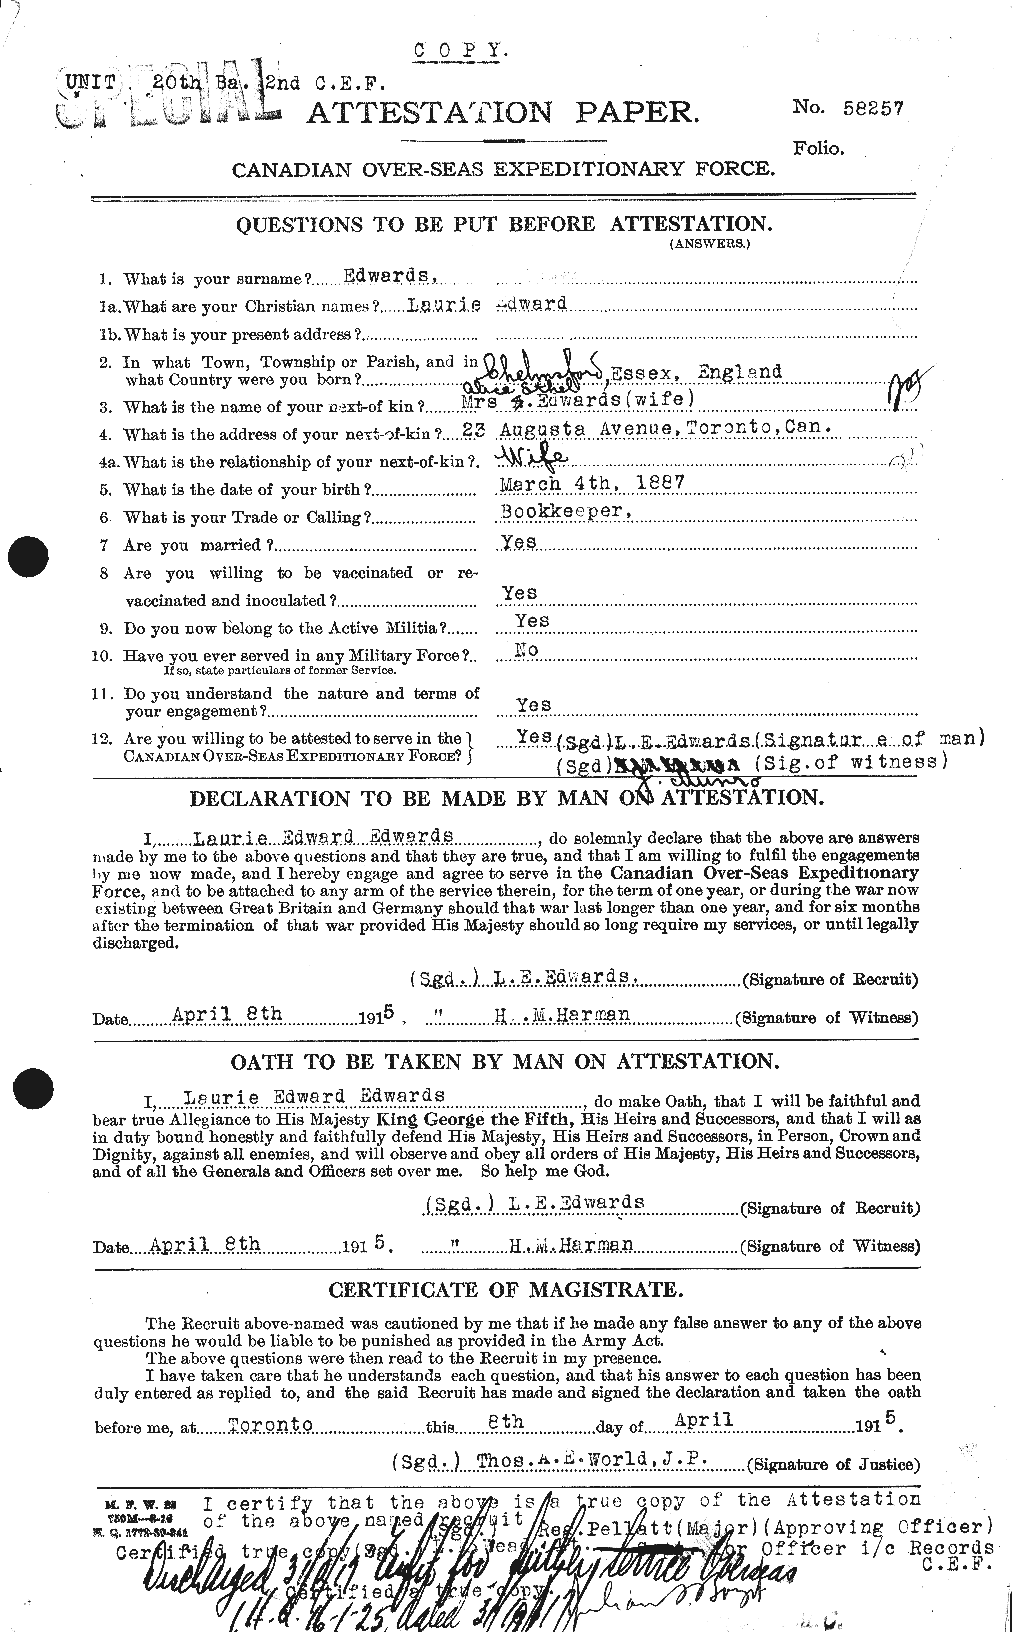 Personnel Records of the First World War - CEF 310190a